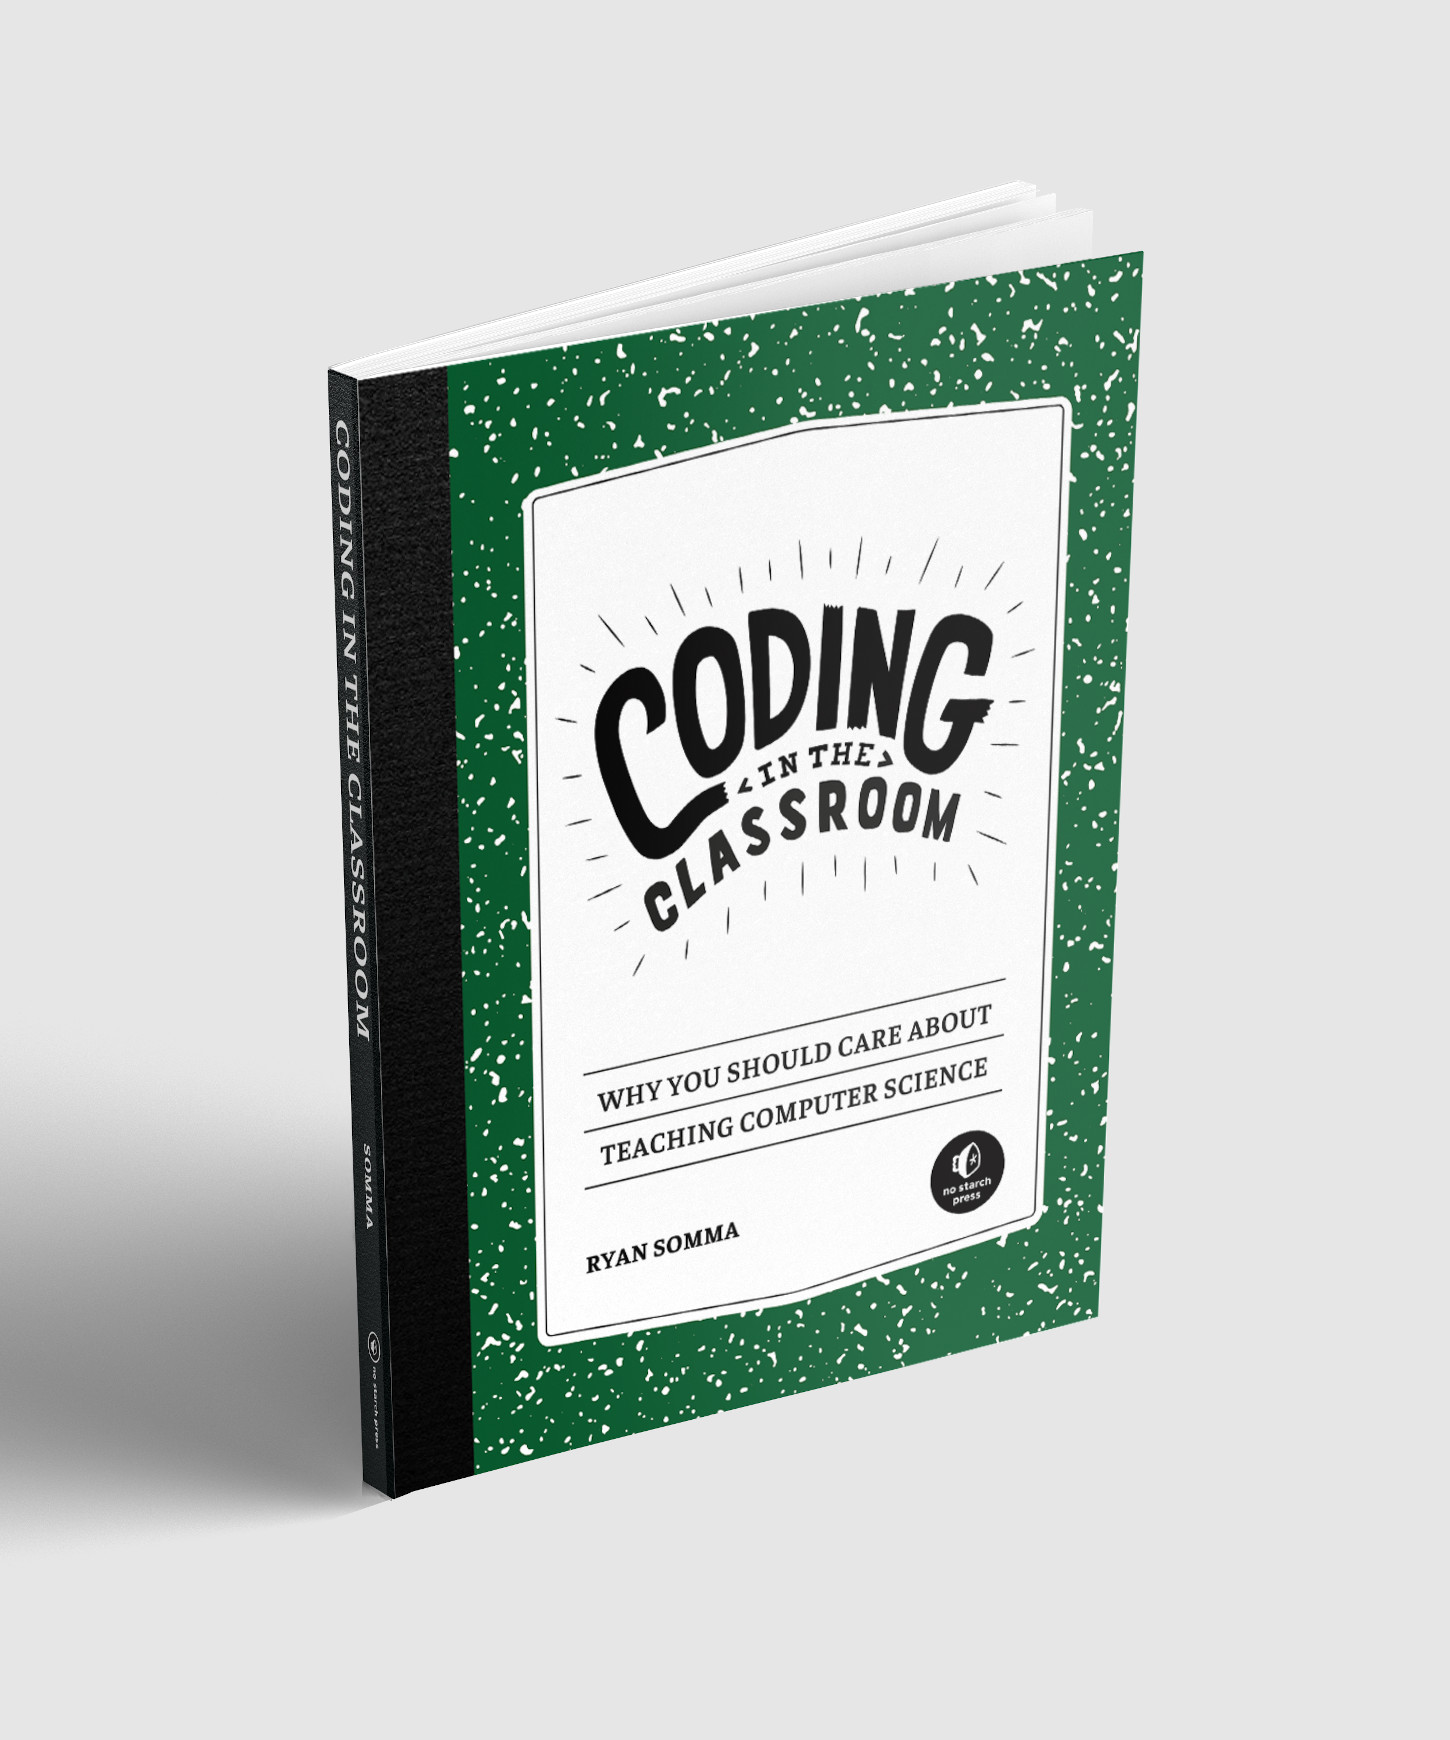 Coding in the Classroom